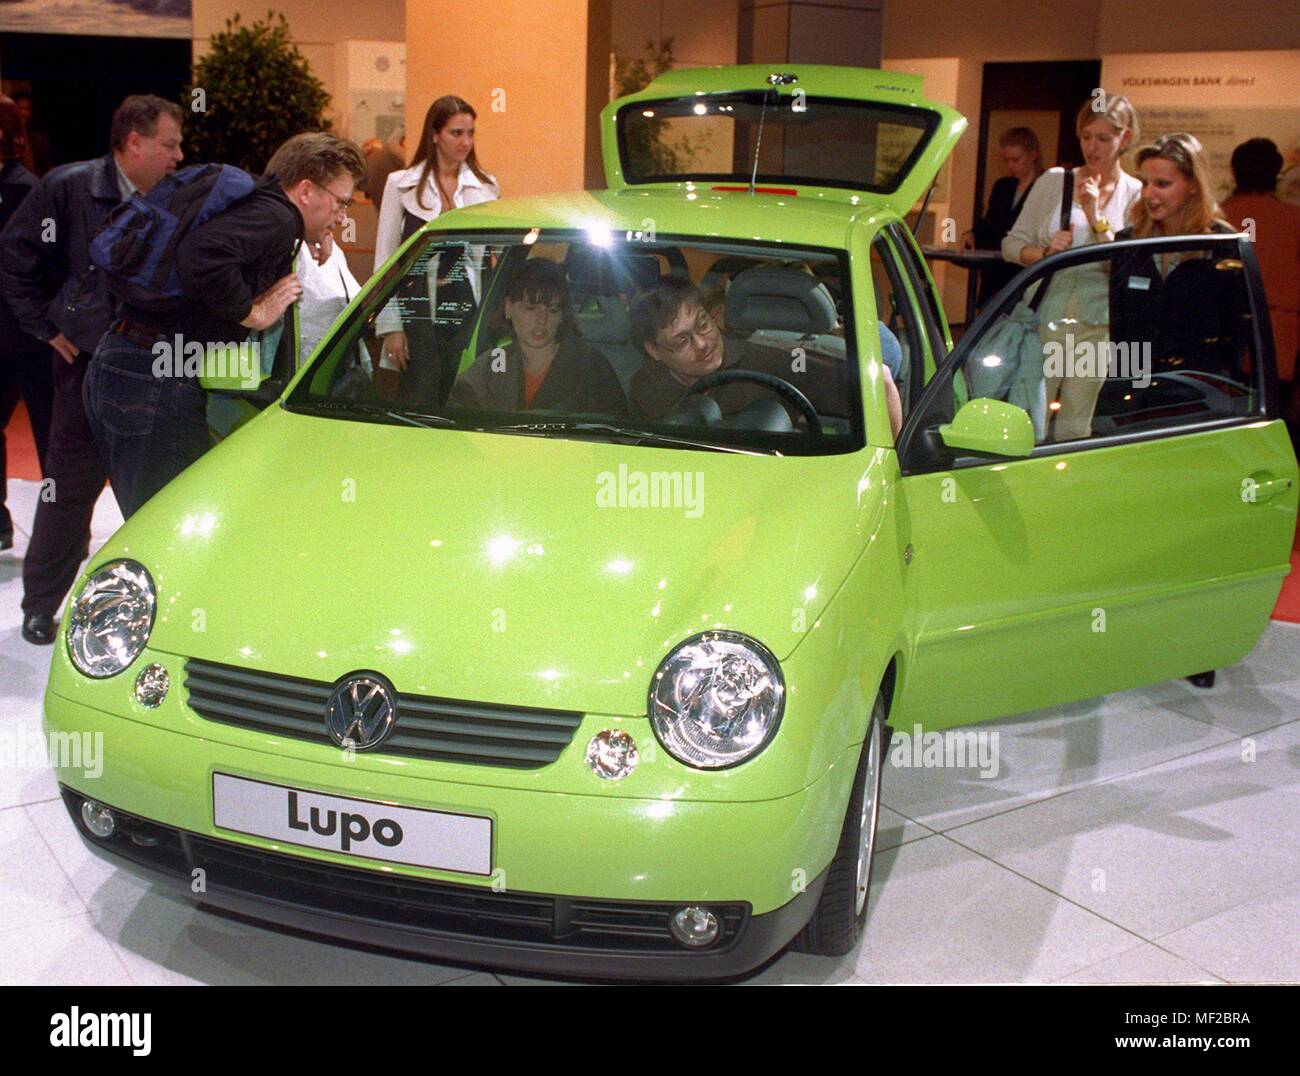 Visitors to the motor show 'aaa '98' in Berlin are interested in the 3-liter car from Volkswagen, the VW Lupo, on 18.10.1998. Until 25.10.98 265 exhibitors from 20 countries will present their current models. Over 30 models will be presented for the first time in Germany. The fair has significantly expanded the show range and wants to make the car fair dawith more attractive for the whole family. Visitors could ride on an off-road course as a passenger in an off-road vehicle or try a tire change like the Formula 1 race. The 11th auto show in Berlin since 1978 is according to the information th Stock Photo